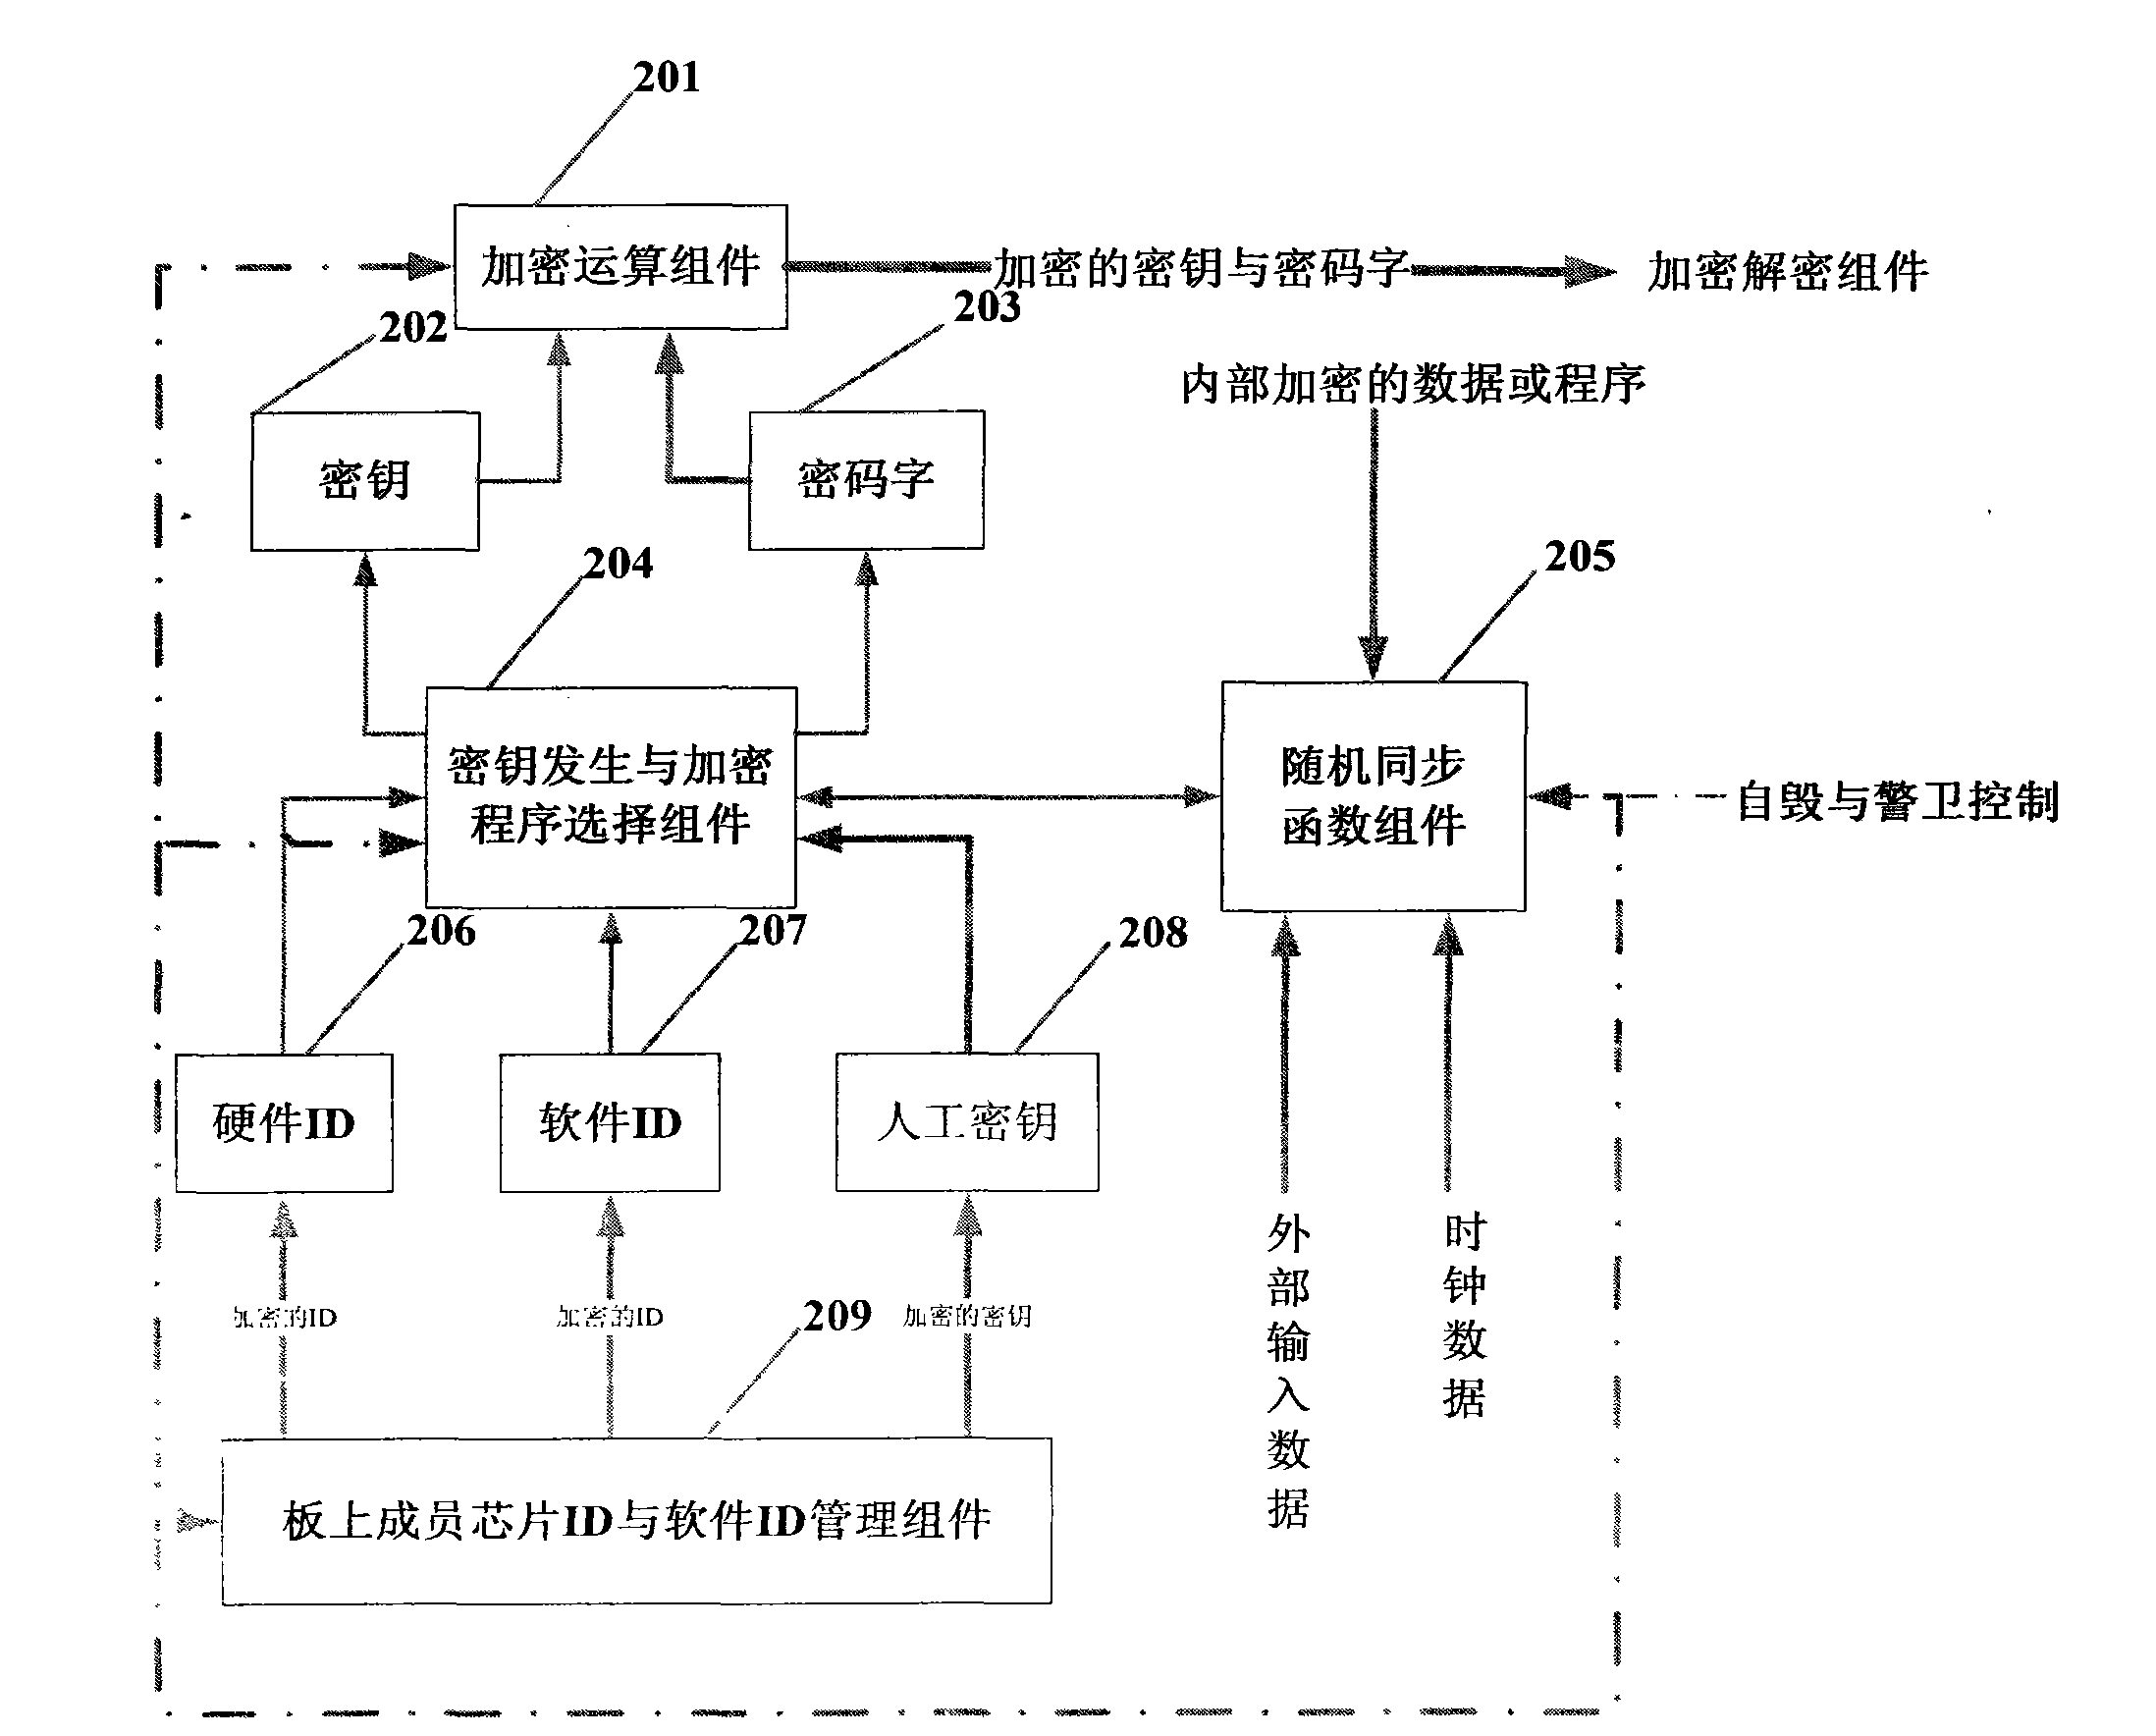 Dereplication encryption lock for software and hardware of embedded system